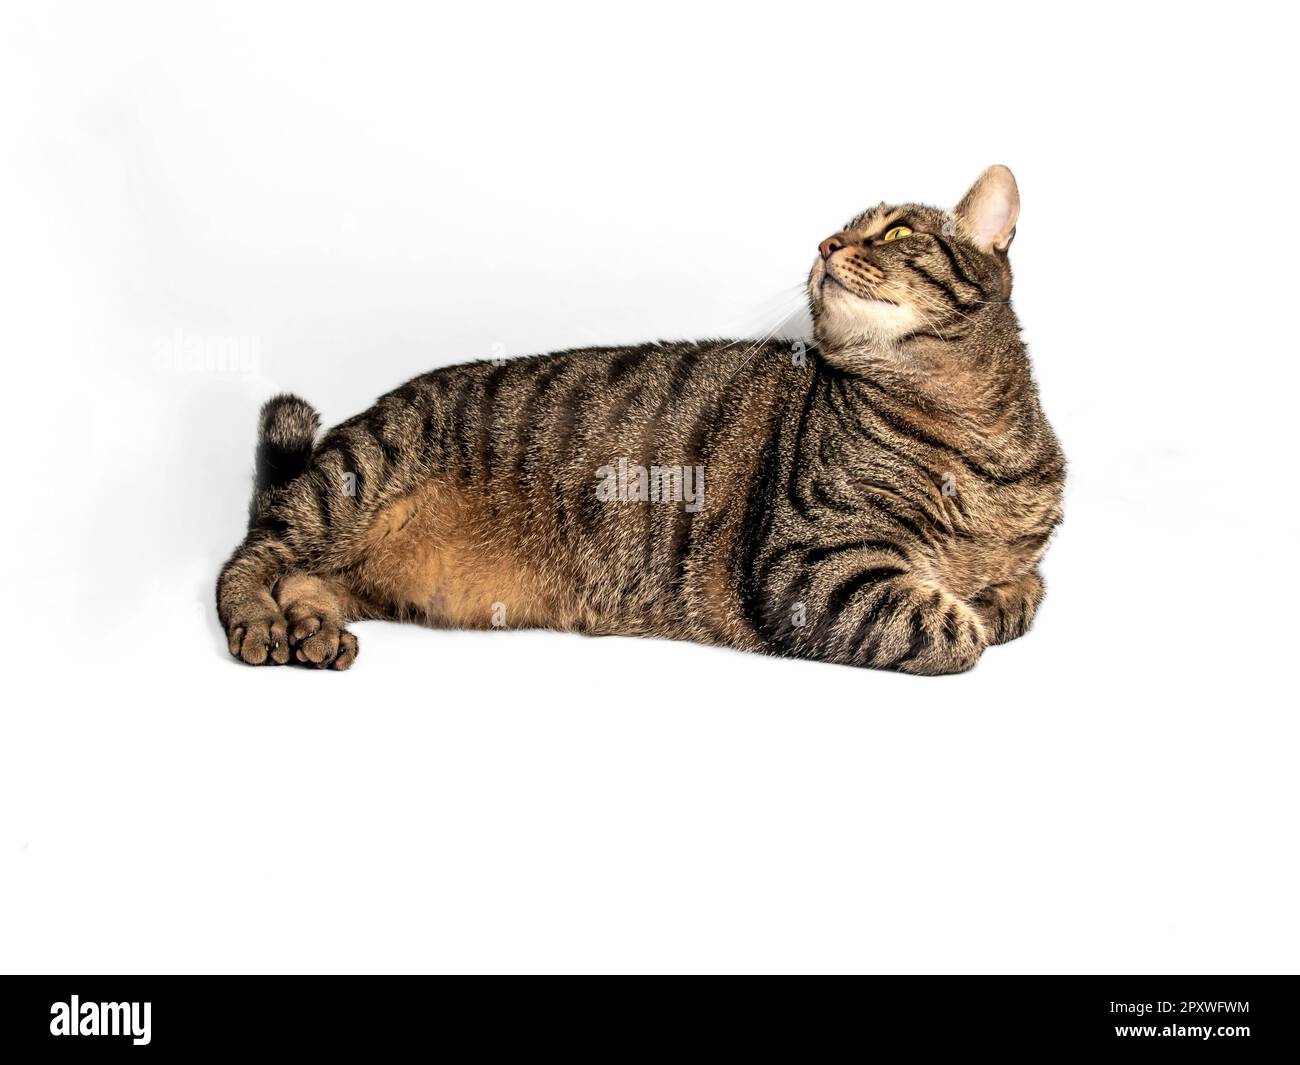 Beautiful European tabby cat with wonderful gray, black fur and orange accents rests in a relaxed position, looking back behind him. Stock Photo